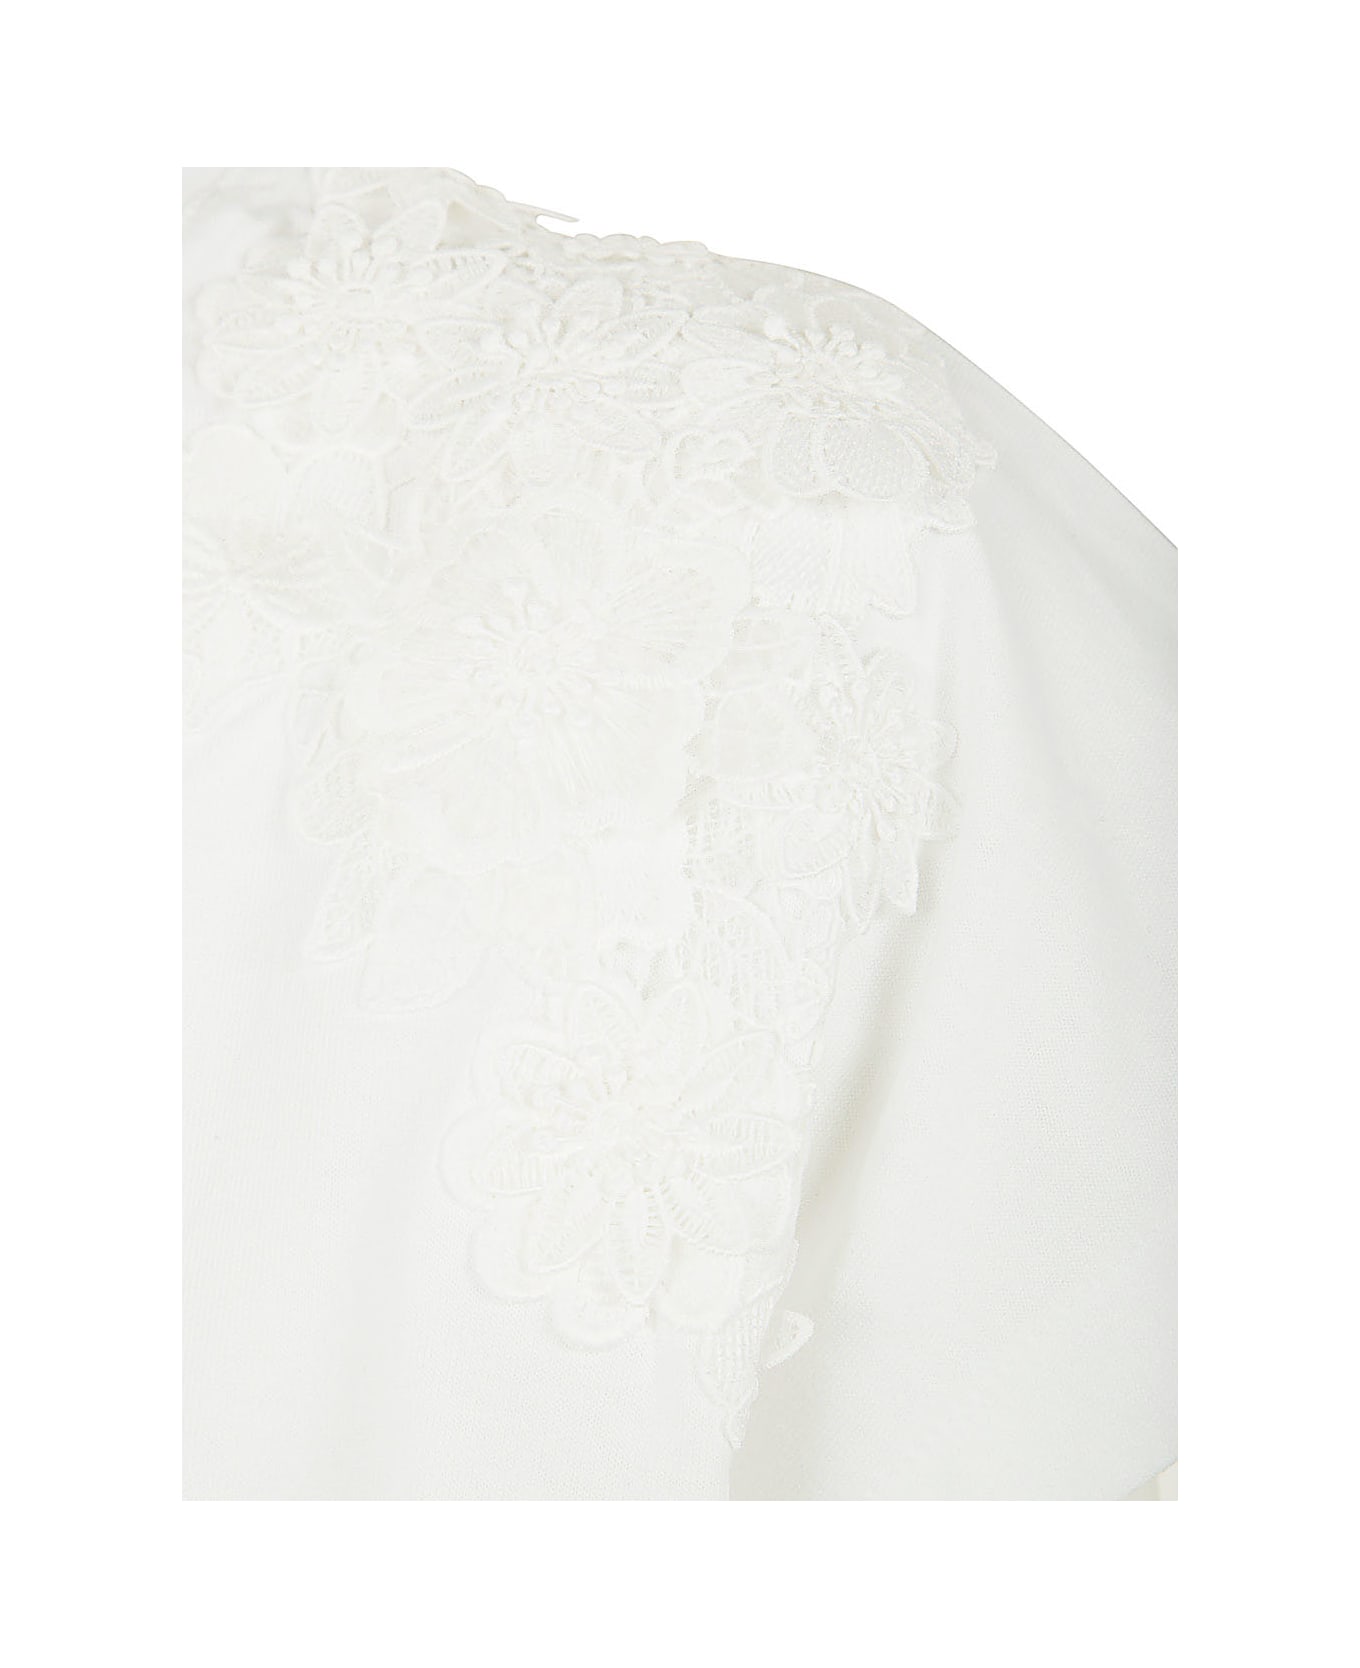 TwinSet Short Sleeve T-shirt With Embroidered Flowers - Optic White